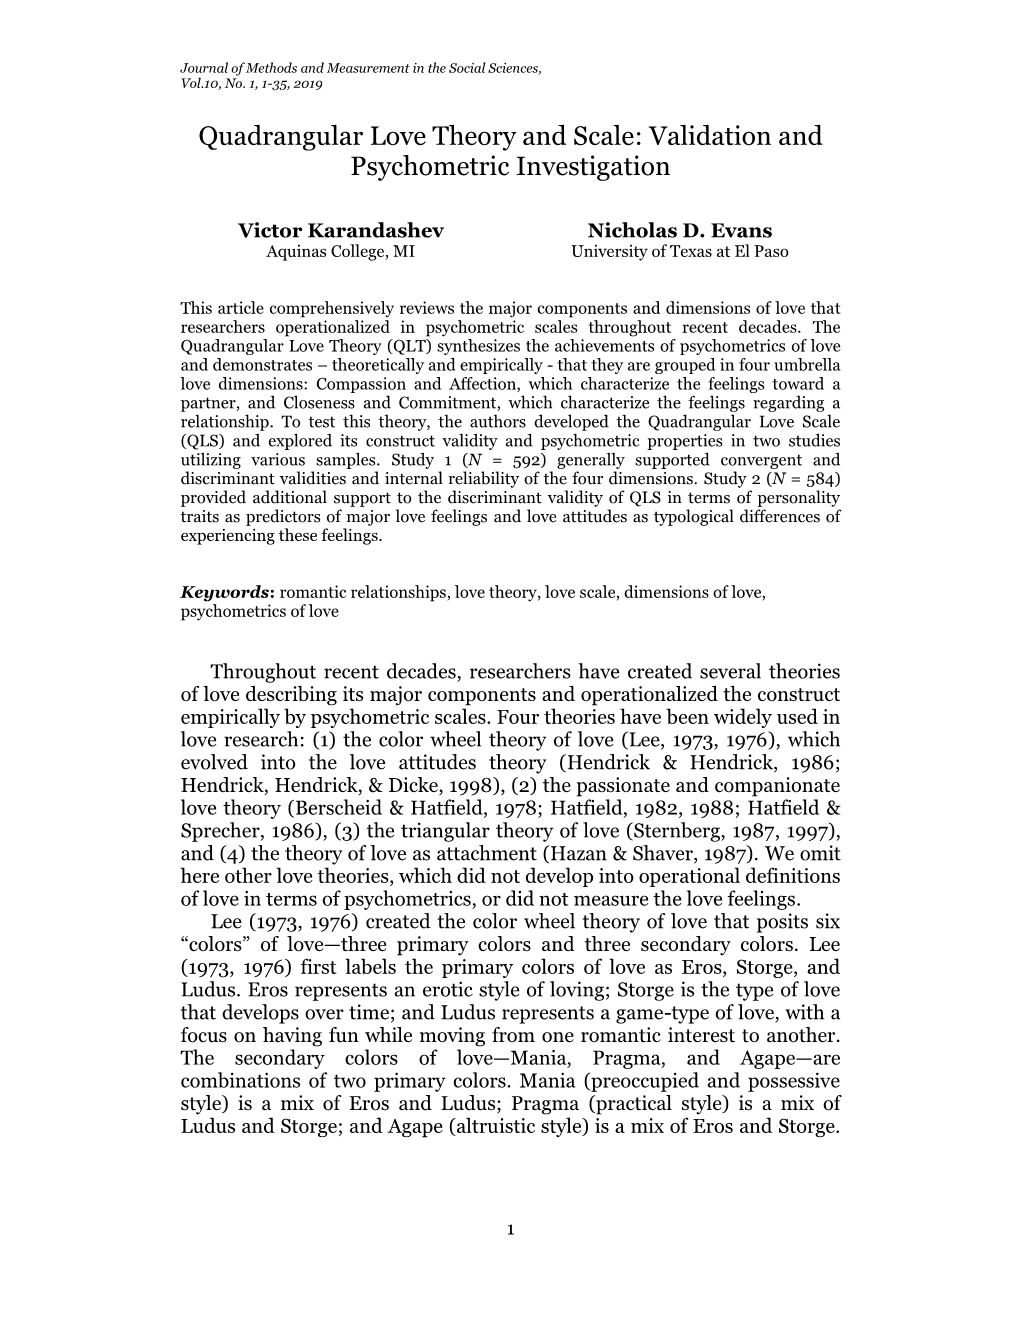 Quadrangular Love Theory and Scale: Validation and Psychometric Investigation